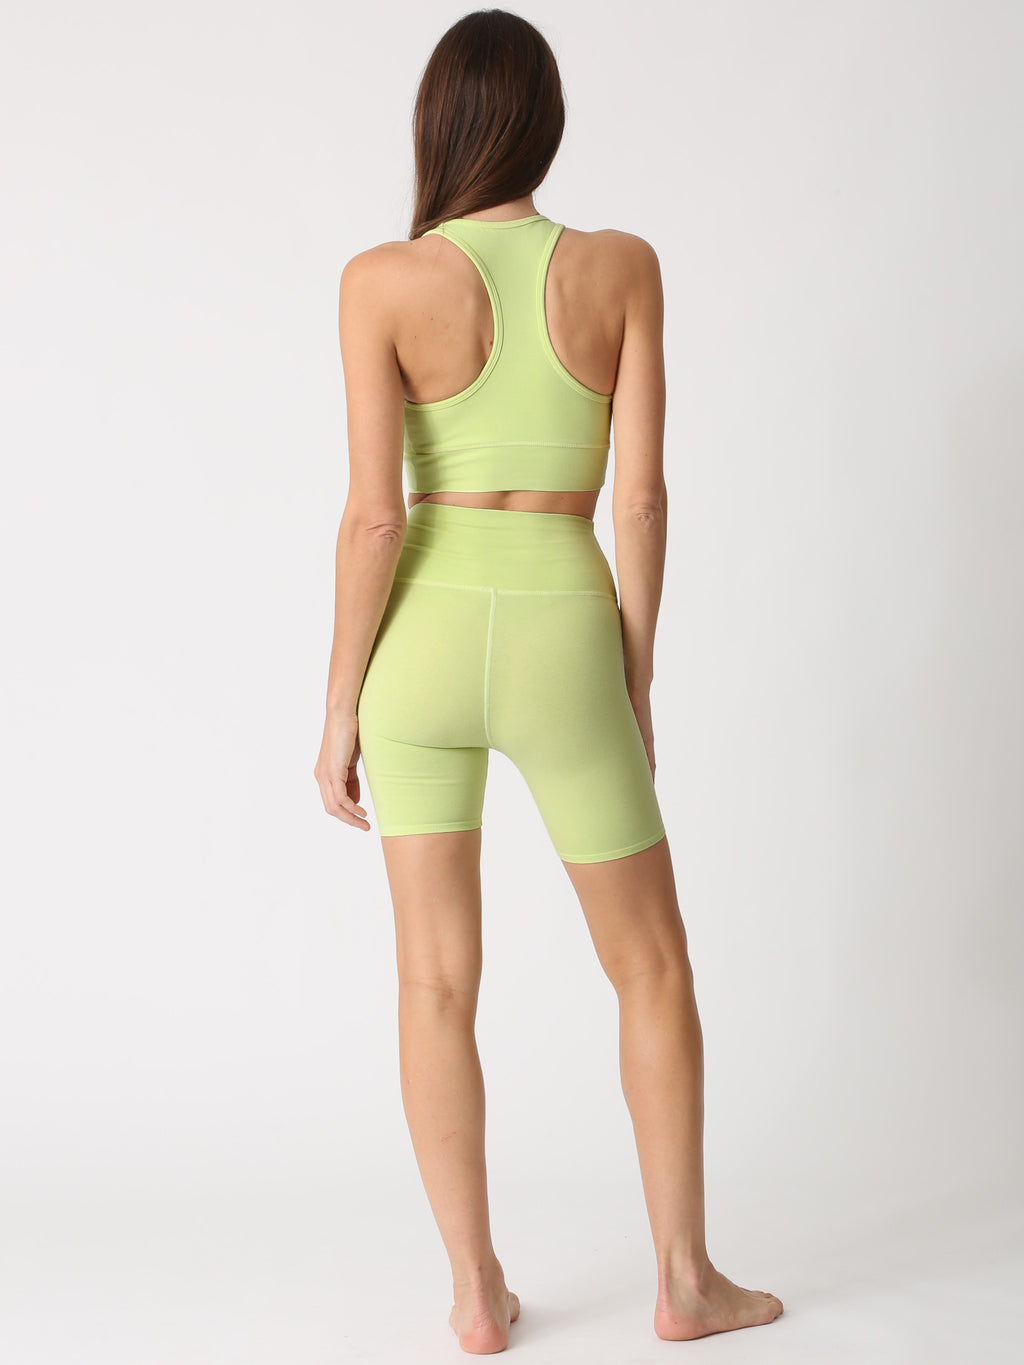 Zoey Short - Chartreuse